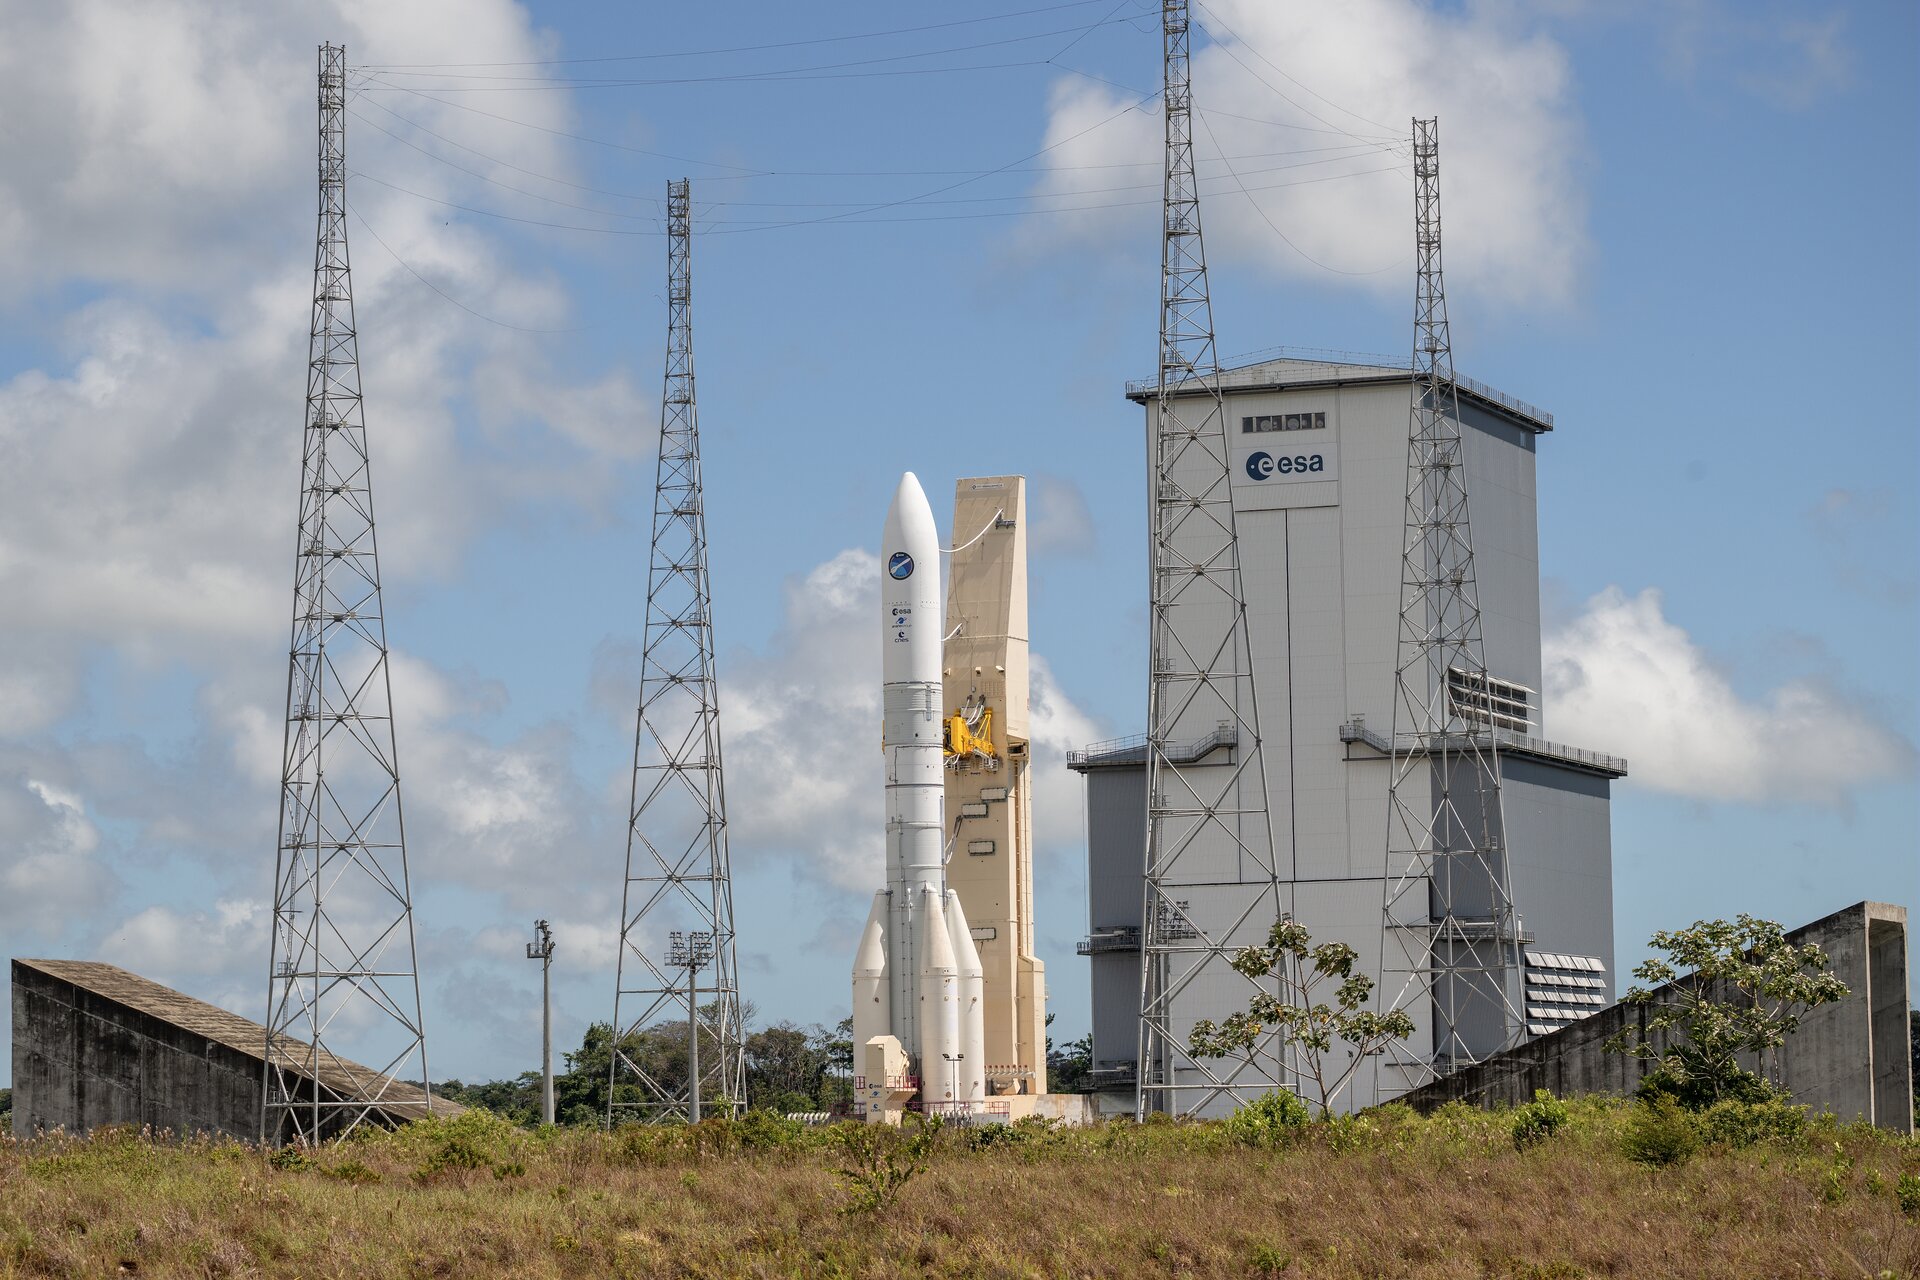 Back on Track: European Rocket Ariane 6 Inaugural Launch Planned for 9 July